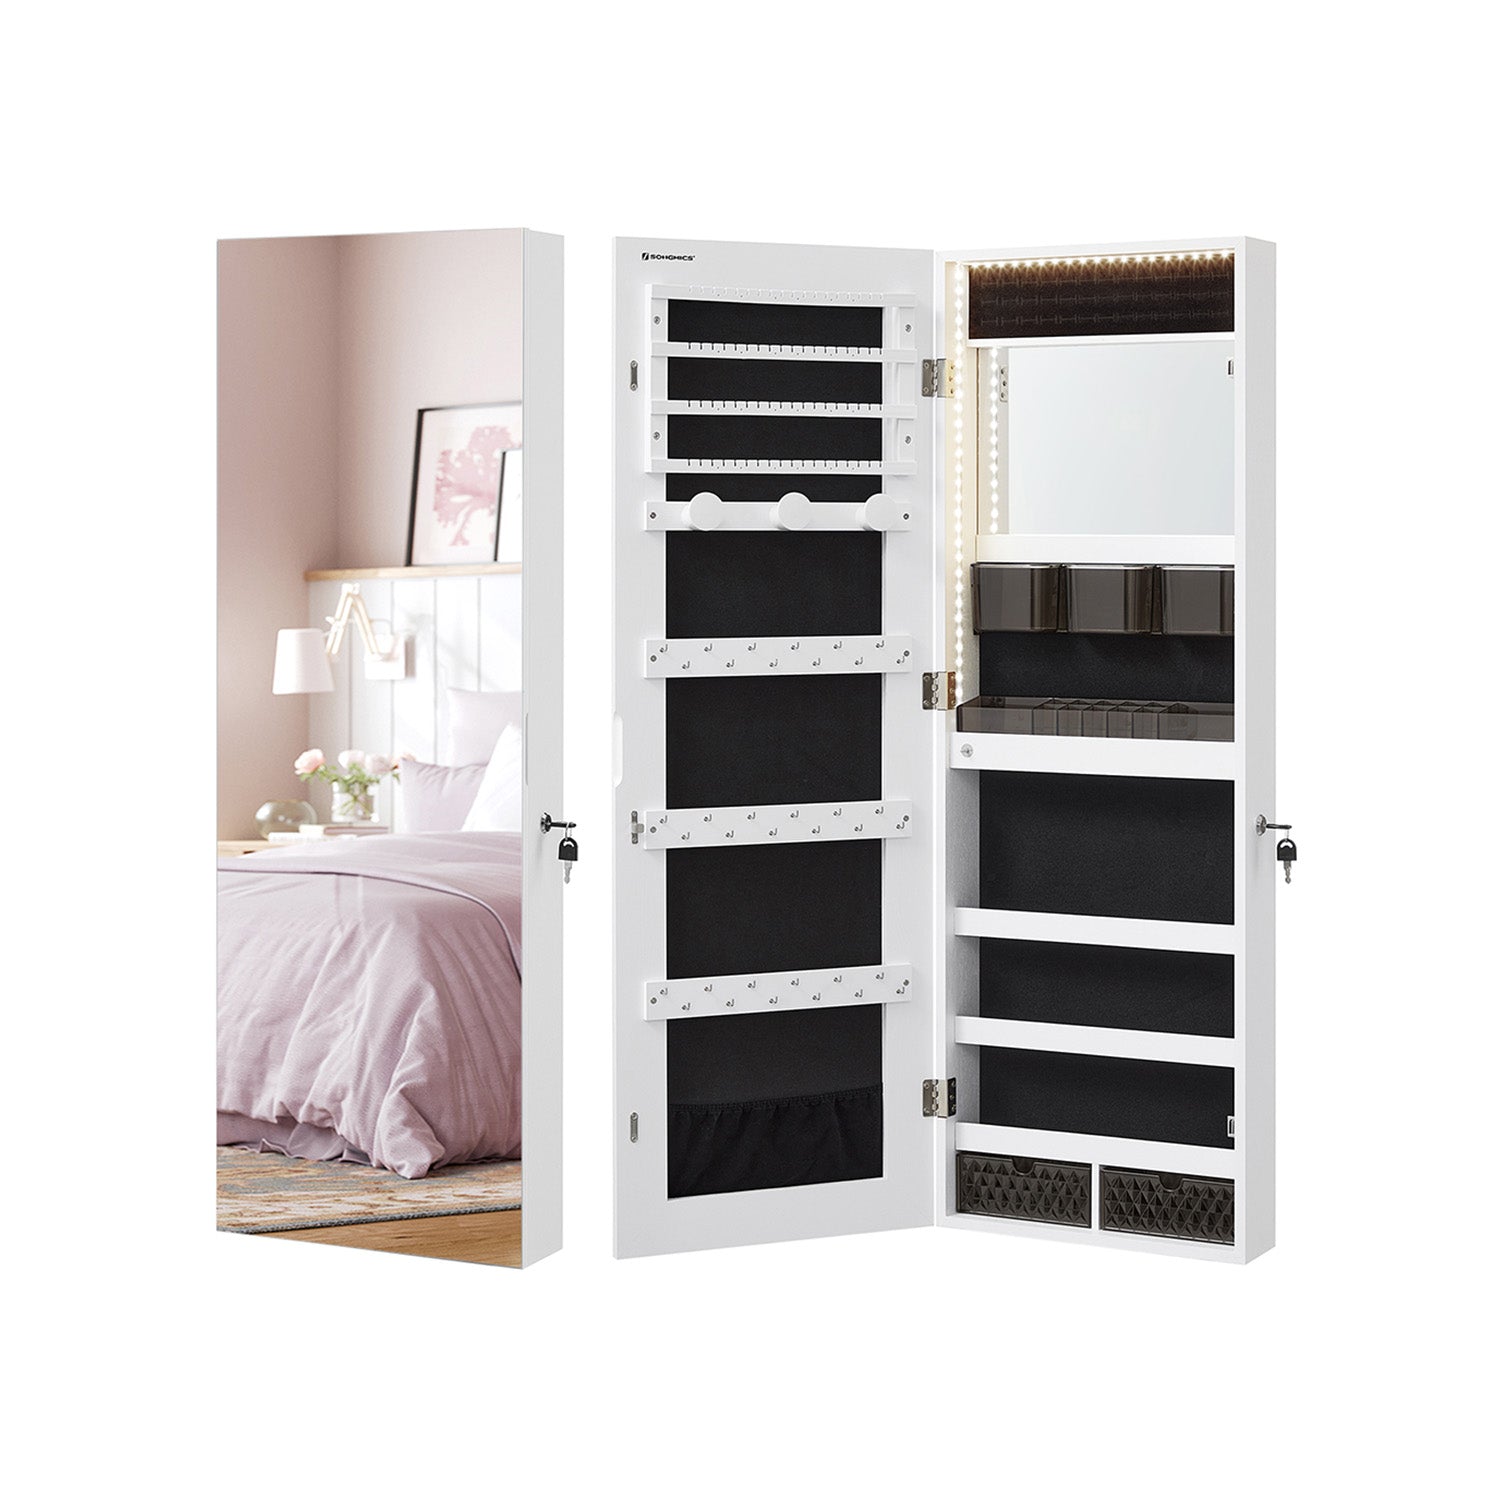 SONGMICS Jewelry Armoire Organizer with LED Lights SONGMICS HOME